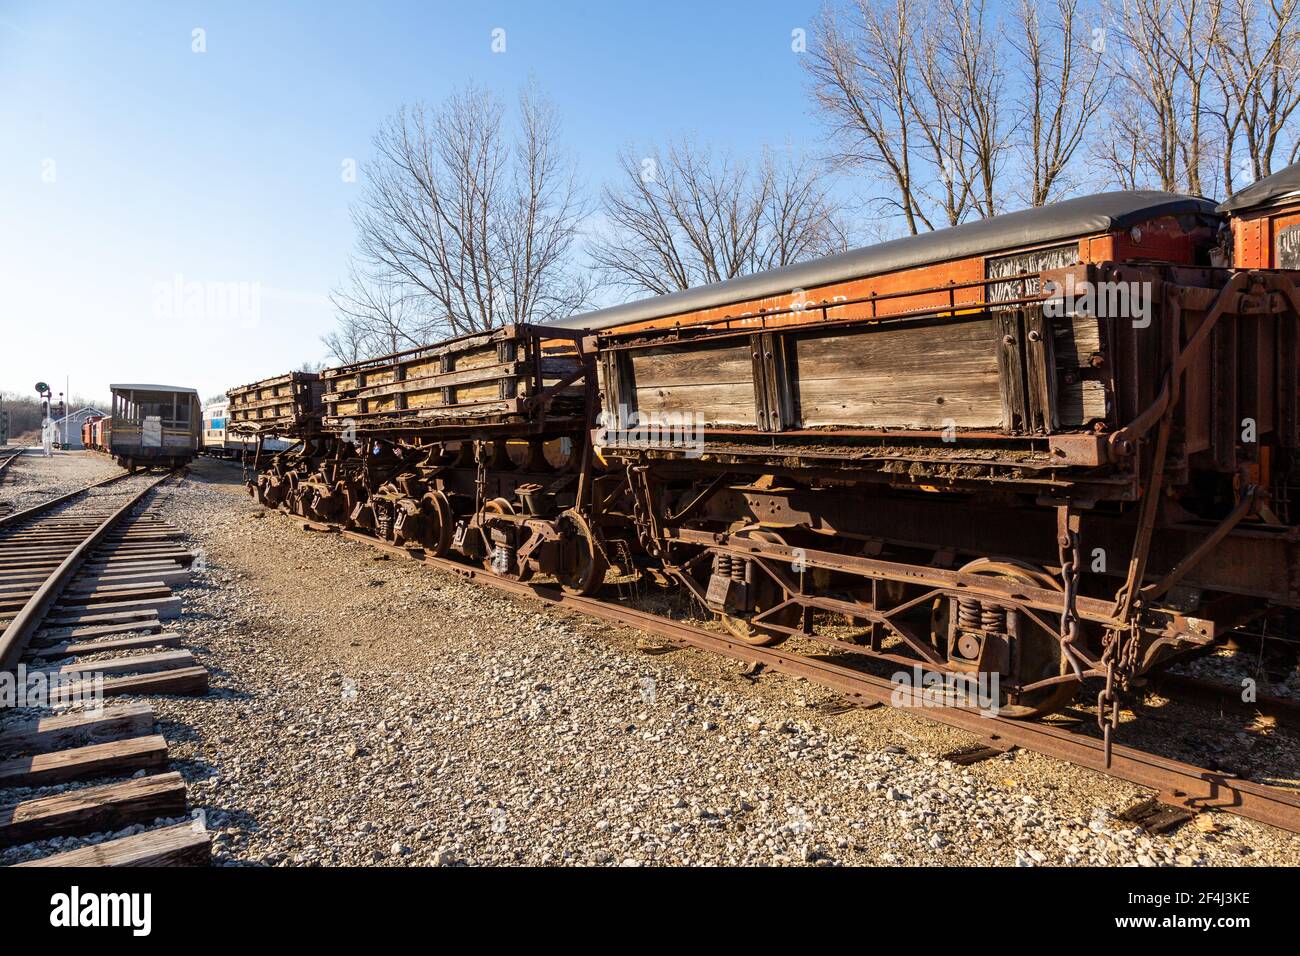 Antique railcars sit on display at the Hoosier Valley Railroad Museum in North Judson, Indiana, USA Stock Photo